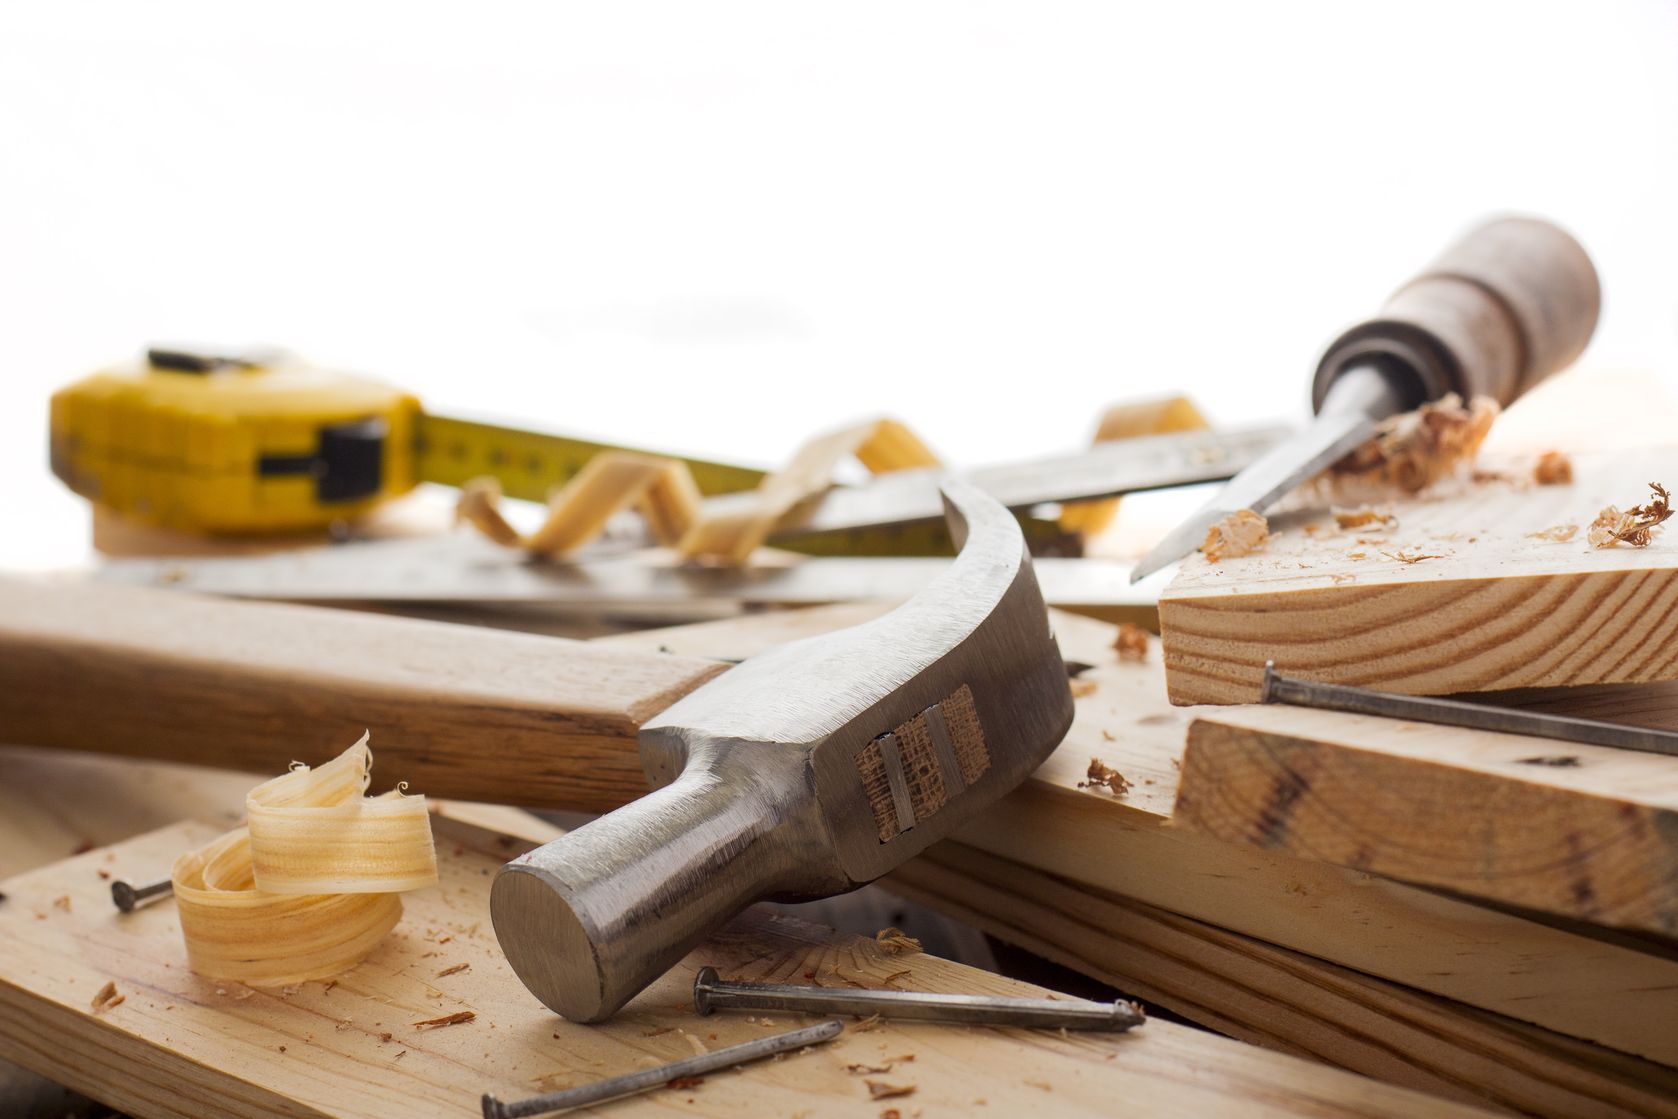 Handyman services: what to look for and what to avoid?